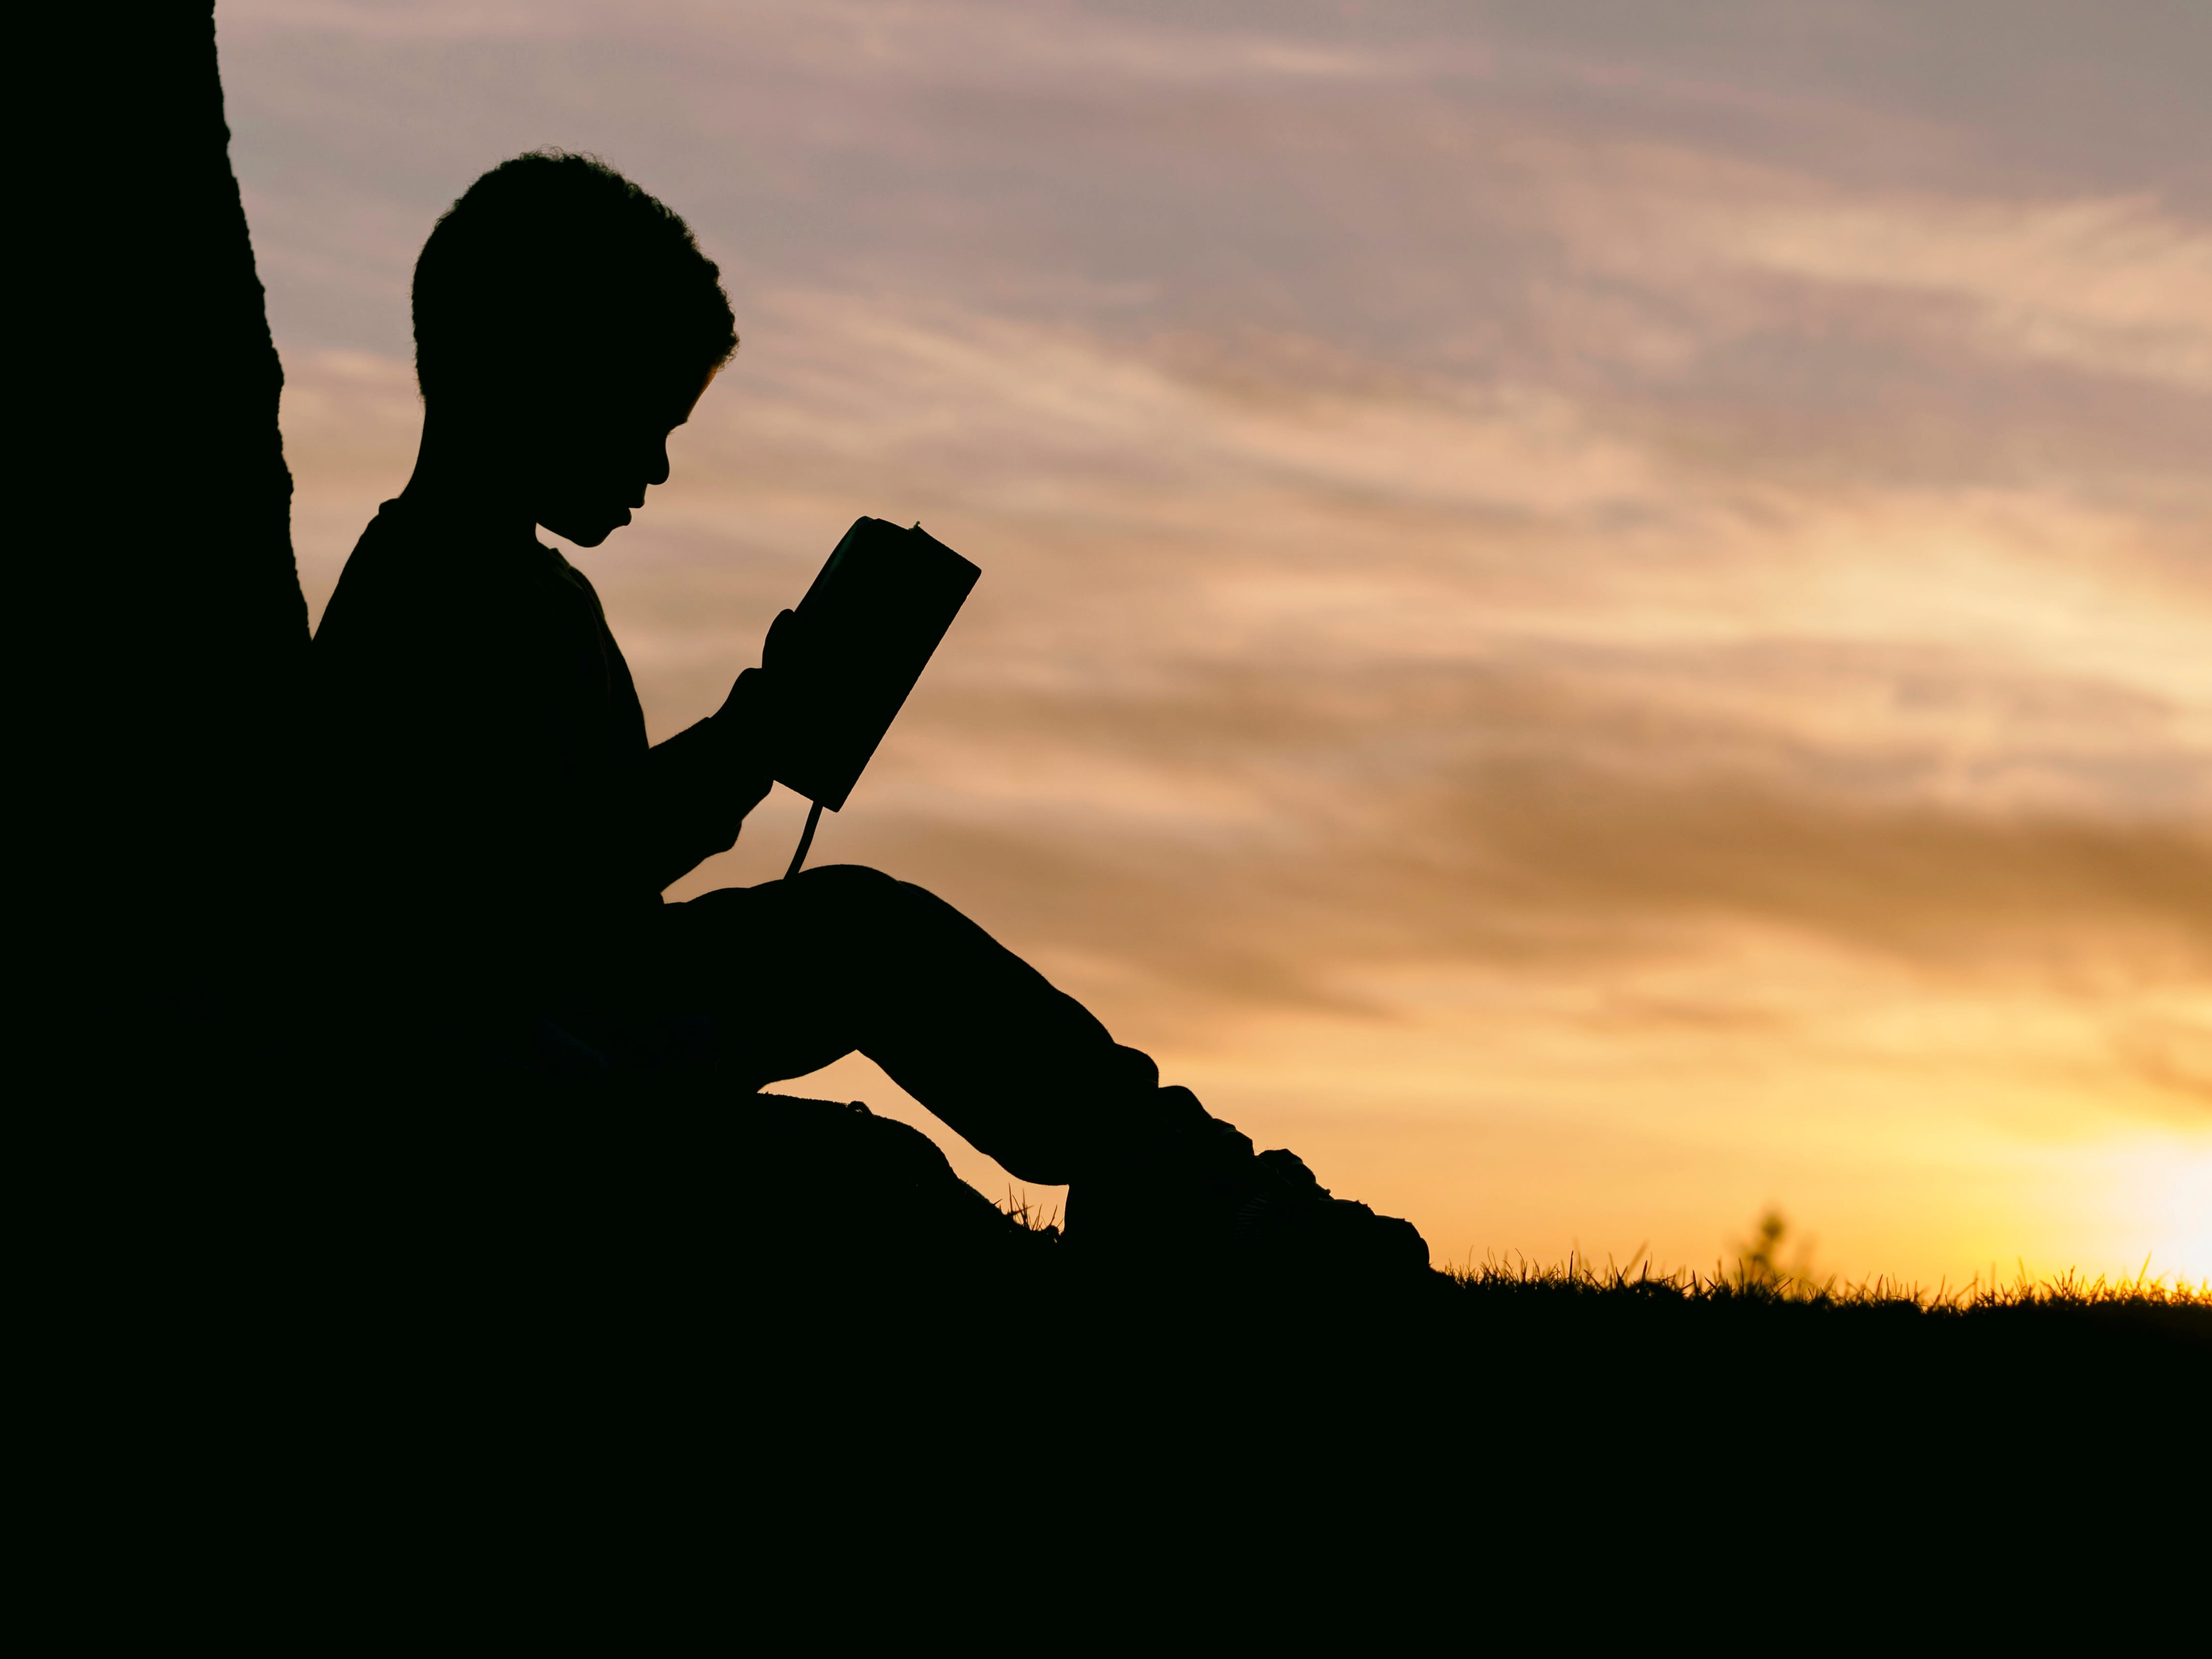 Silhouette of boy leaning against a tree at sunset, reading a book; image by Aaron Burden, via Unsplash.com.